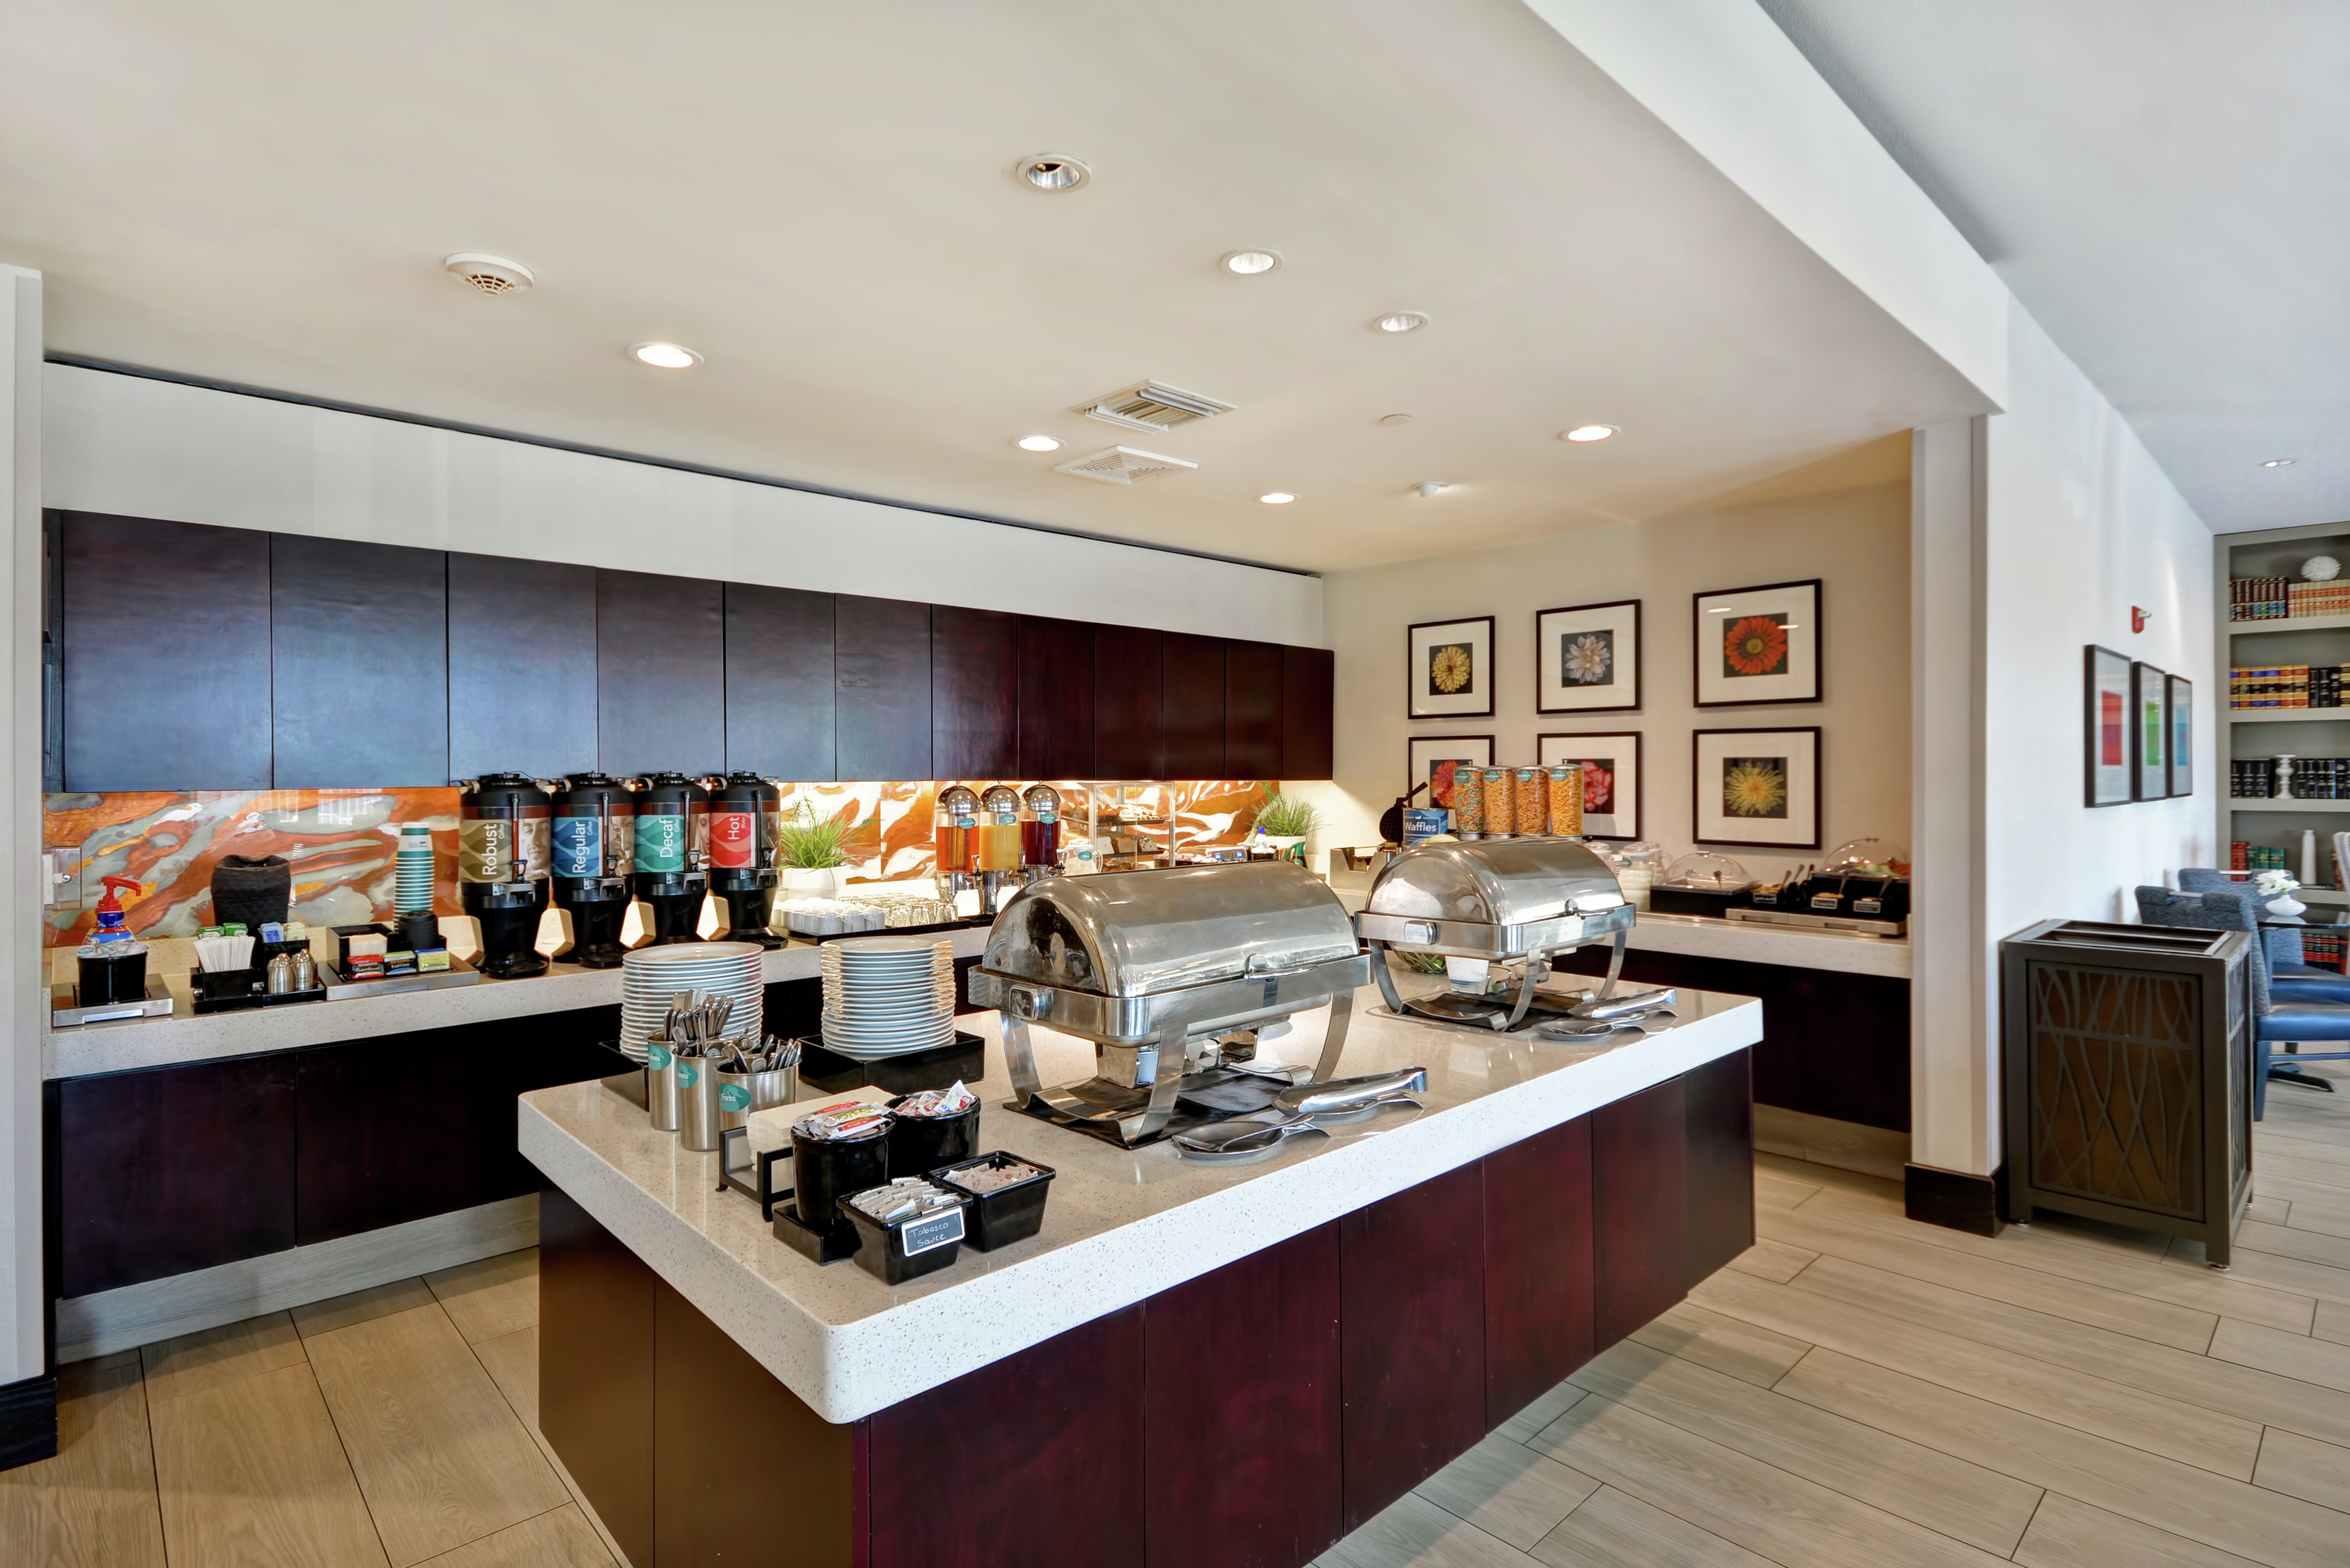 Breakfast Buffet Area with Hot and Cold Food Options 